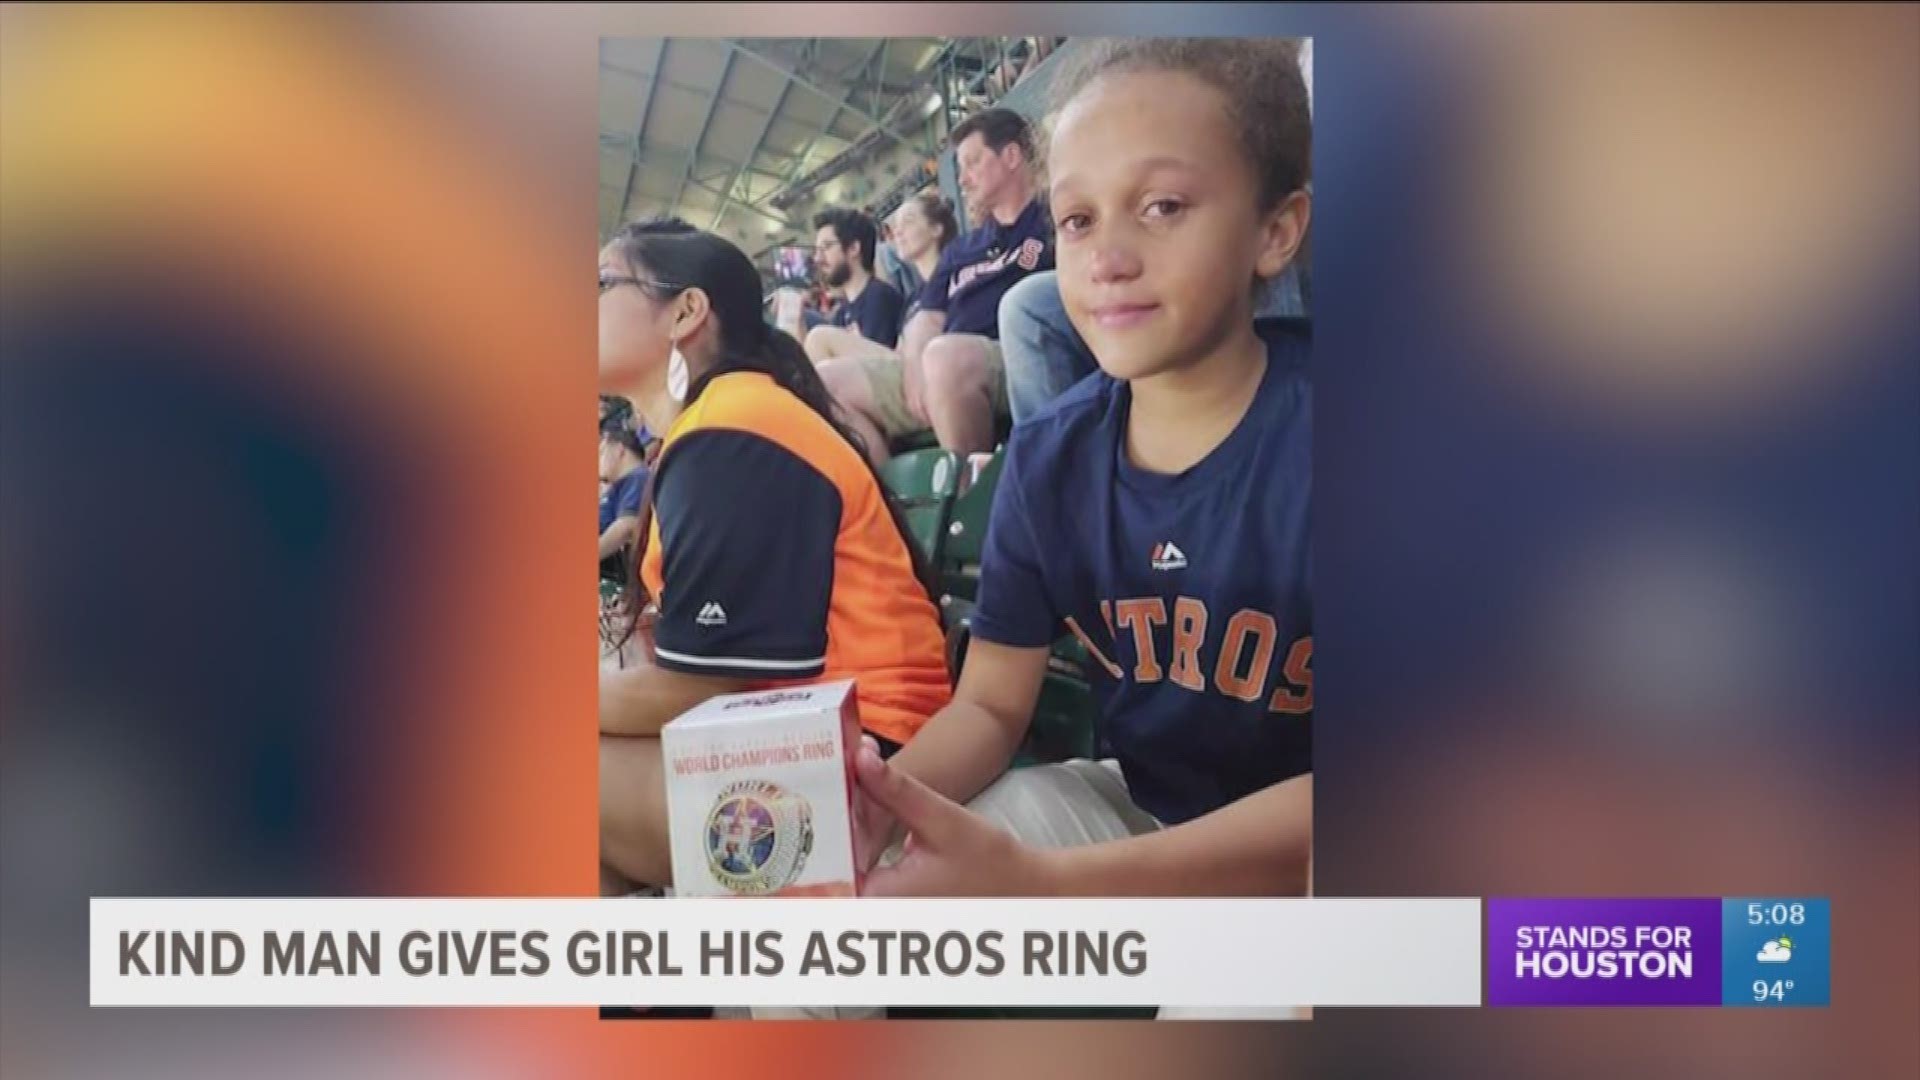 The search is on for a kind stranger who gave his Astros championship replica ring to a young girl who lost hers.